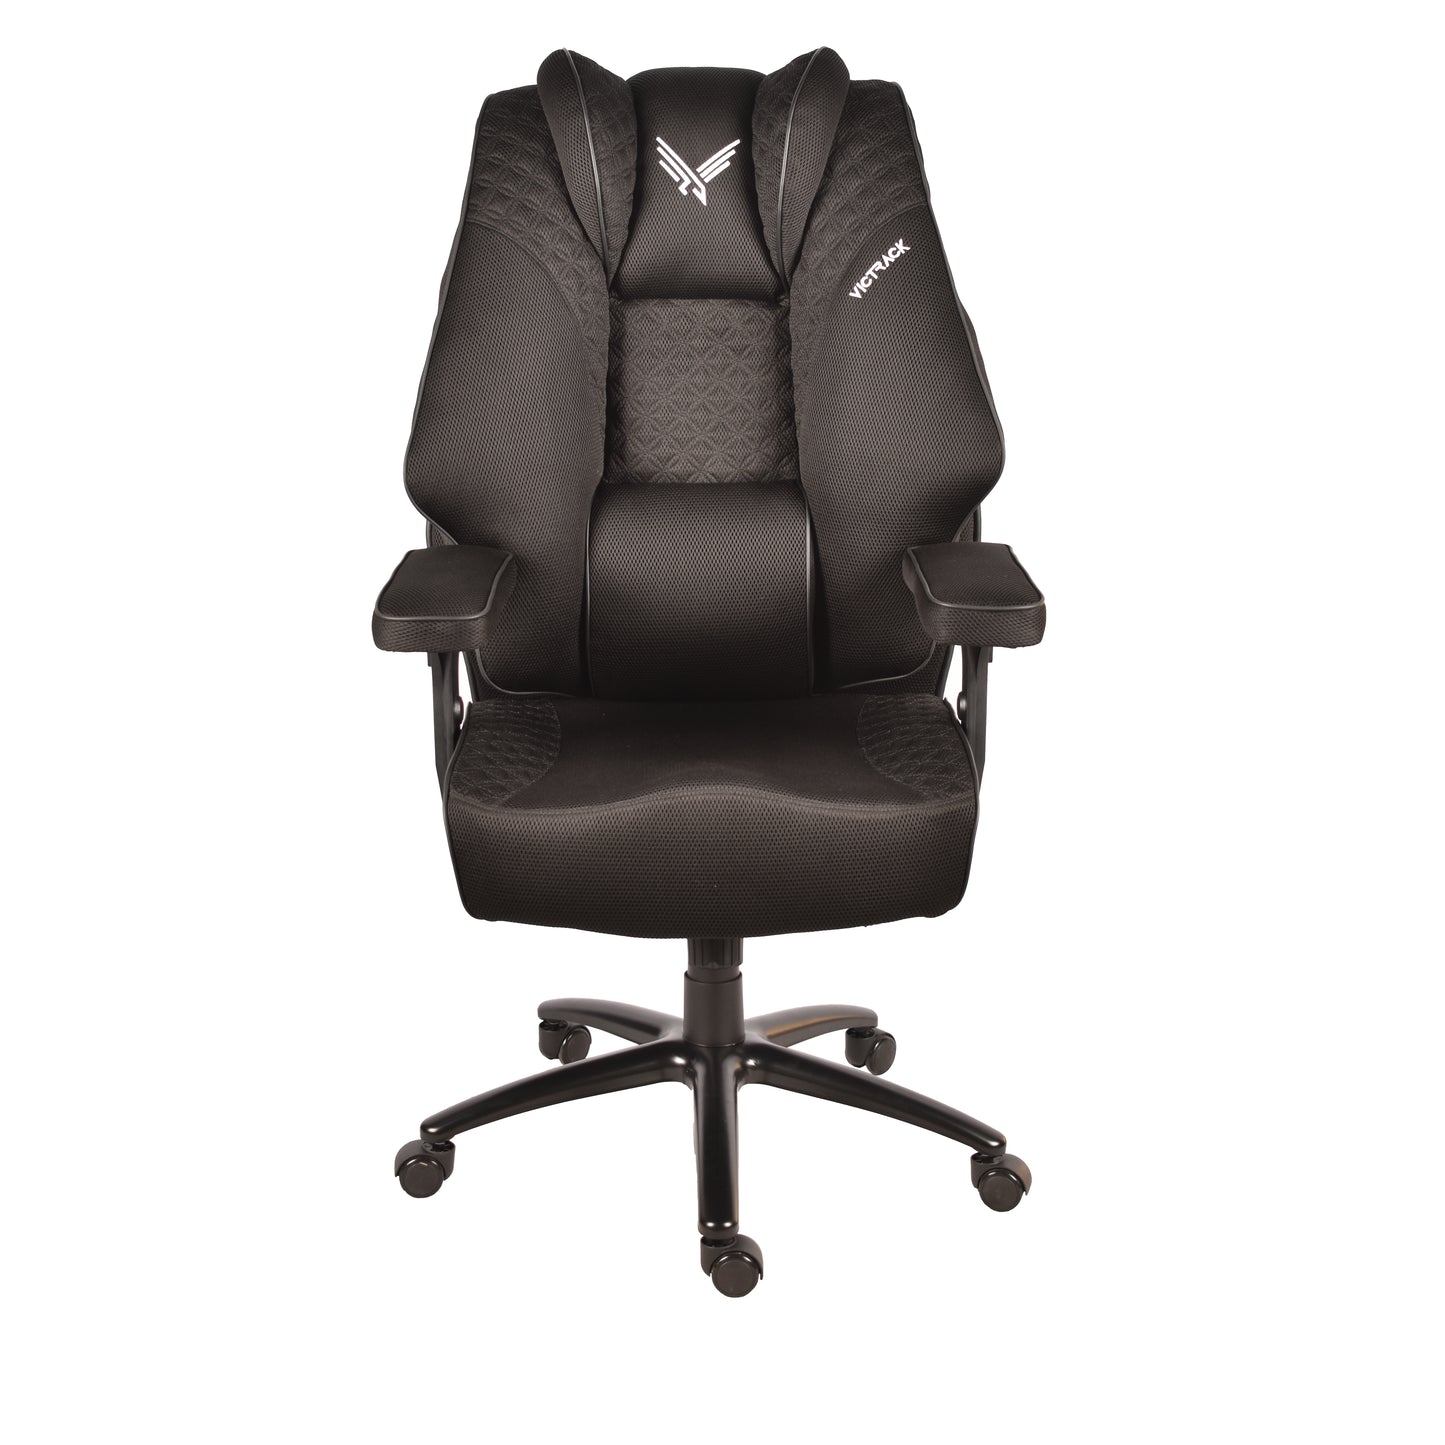 Victrack Premium Pro Gaming Chair, Computer Chair, Height Adjustable, with 360°-Swivel Seat and for Office or Gaming, A-01, Black